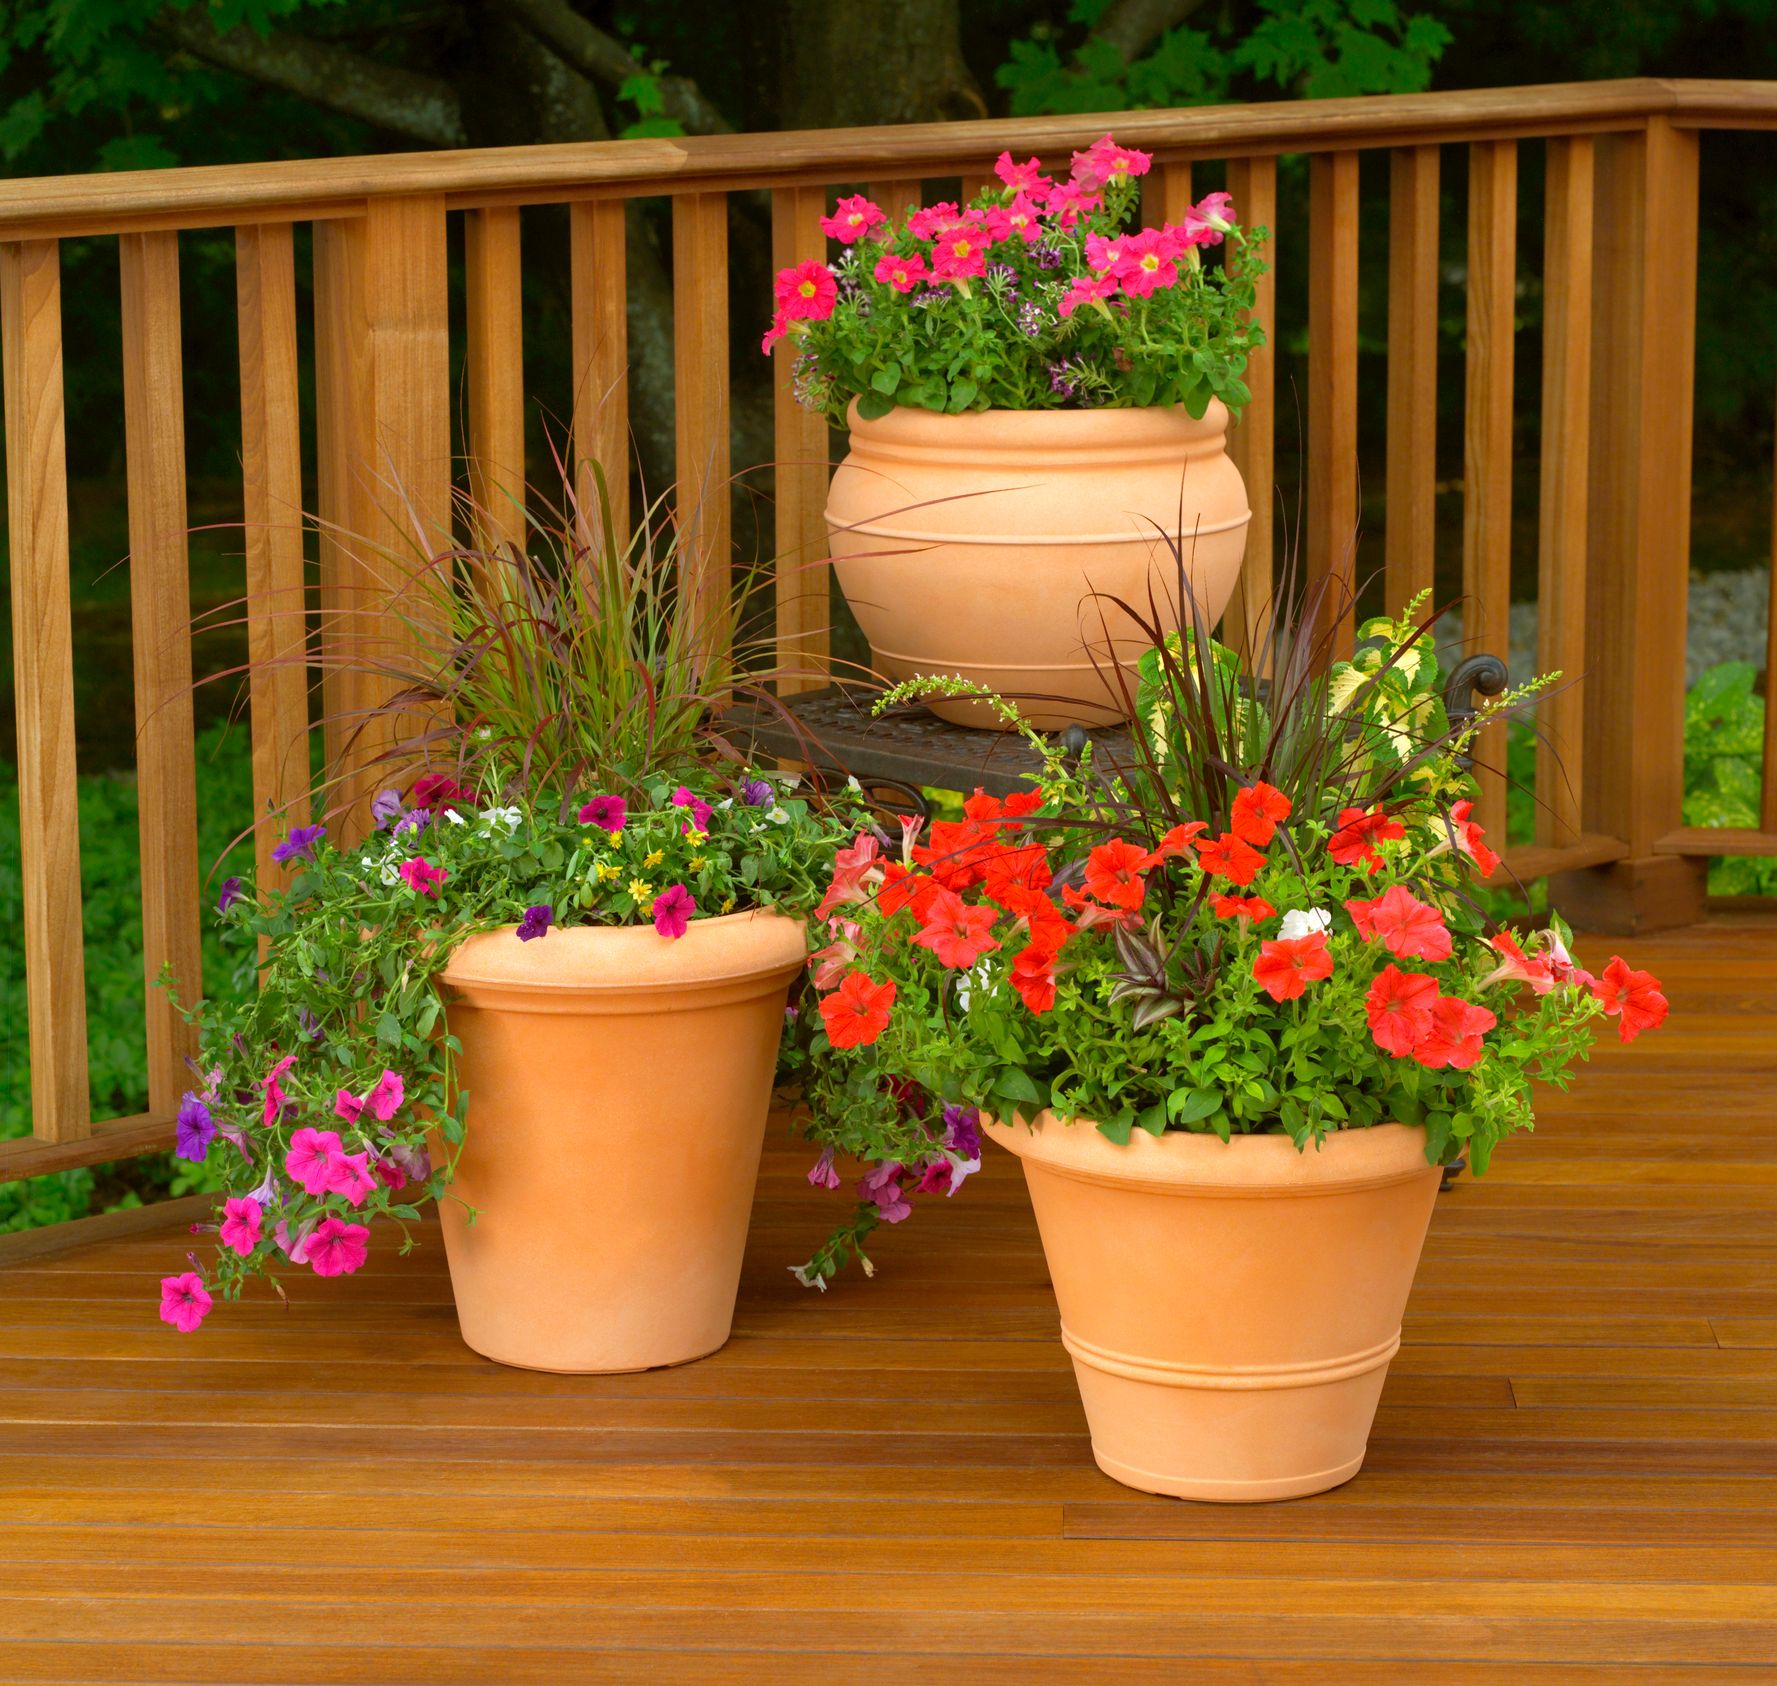 backyard deck ideas to add containers with colorful flowers